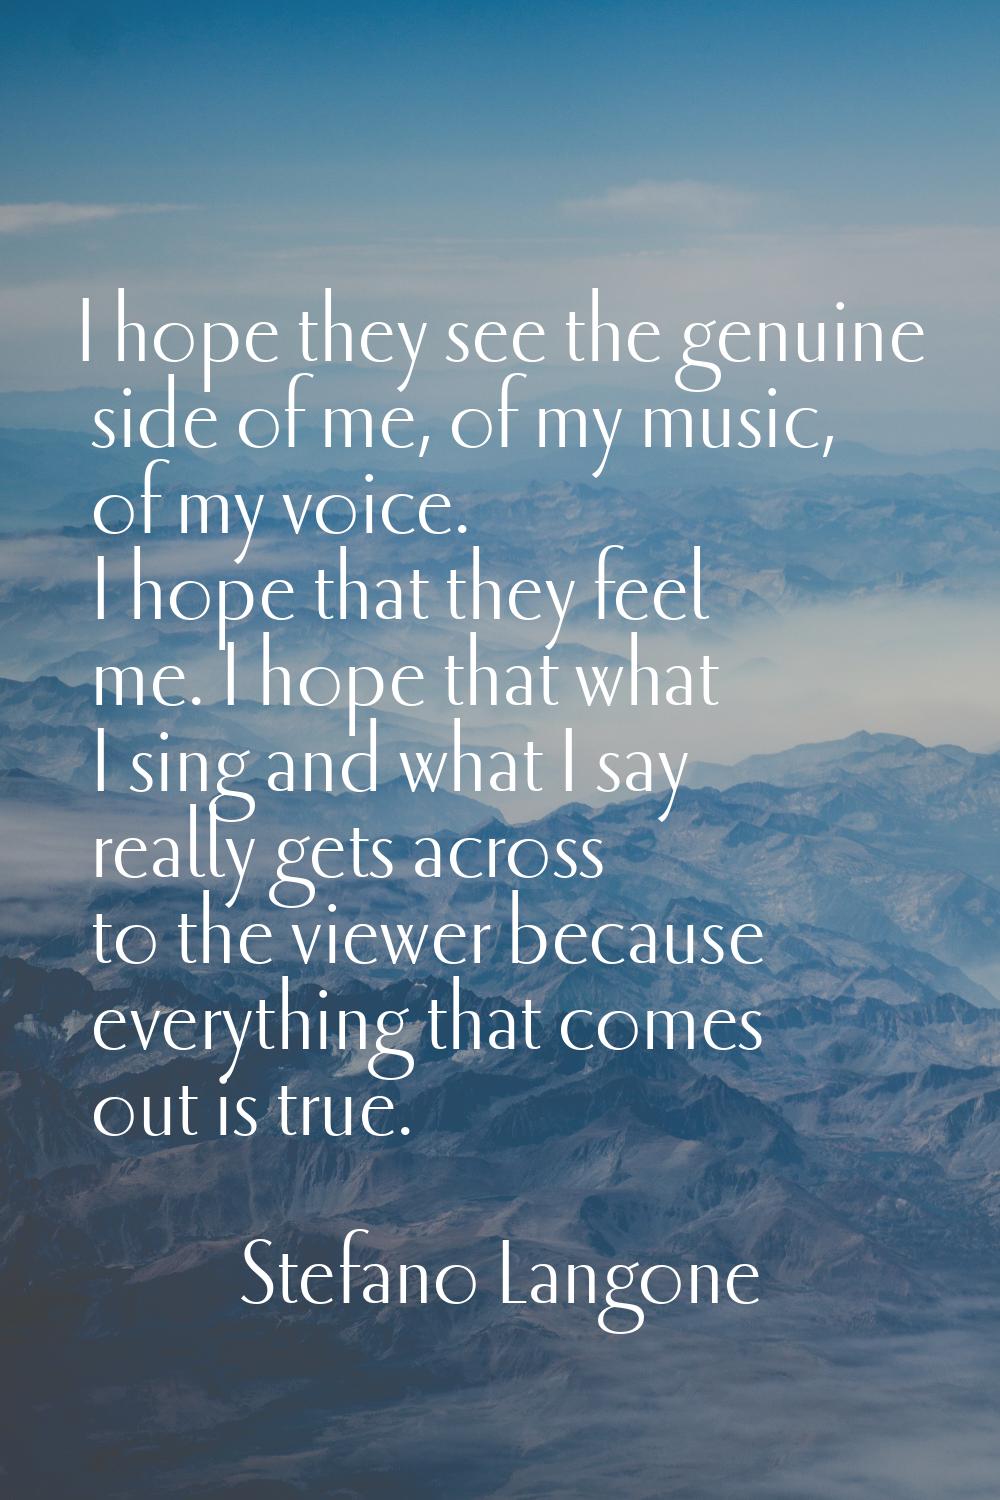 I hope they see the genuine side of me, of my music, of my voice. I hope that they feel me. I hope 